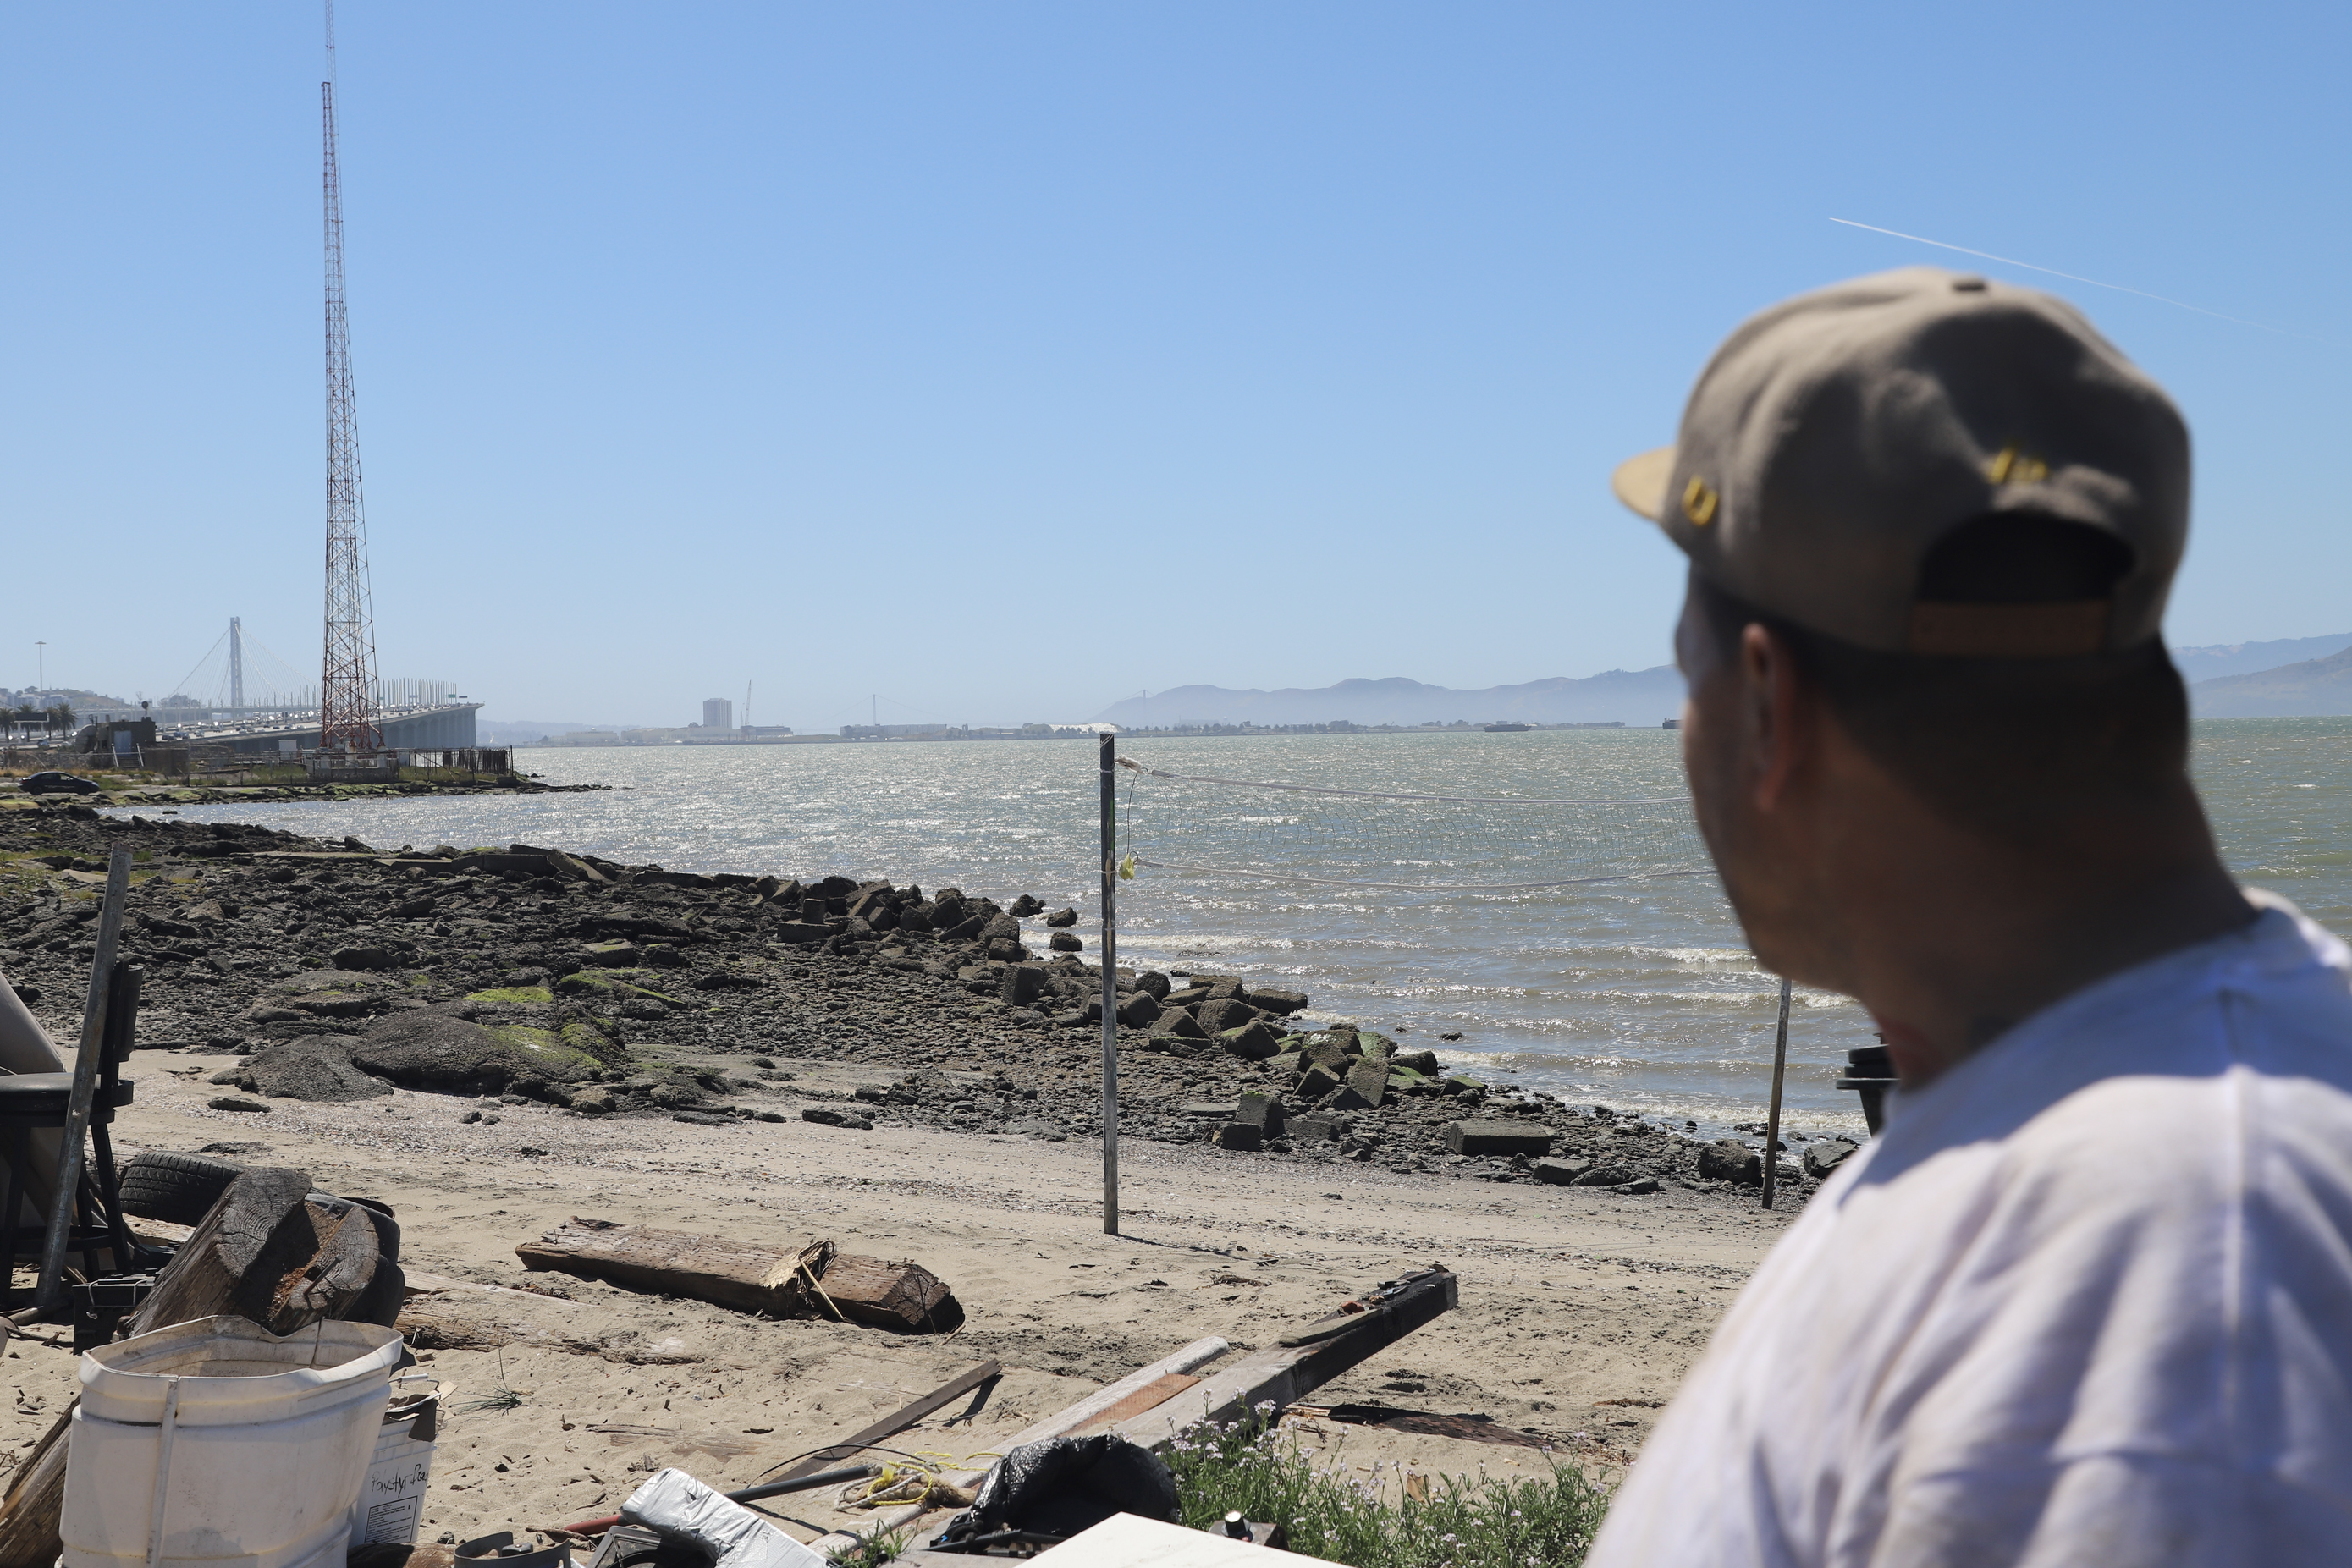 A person in a beige cap looks out over a rocky shoreline with calm waters, distant bridges, a tall red tower, and a clear blue sky in the background.